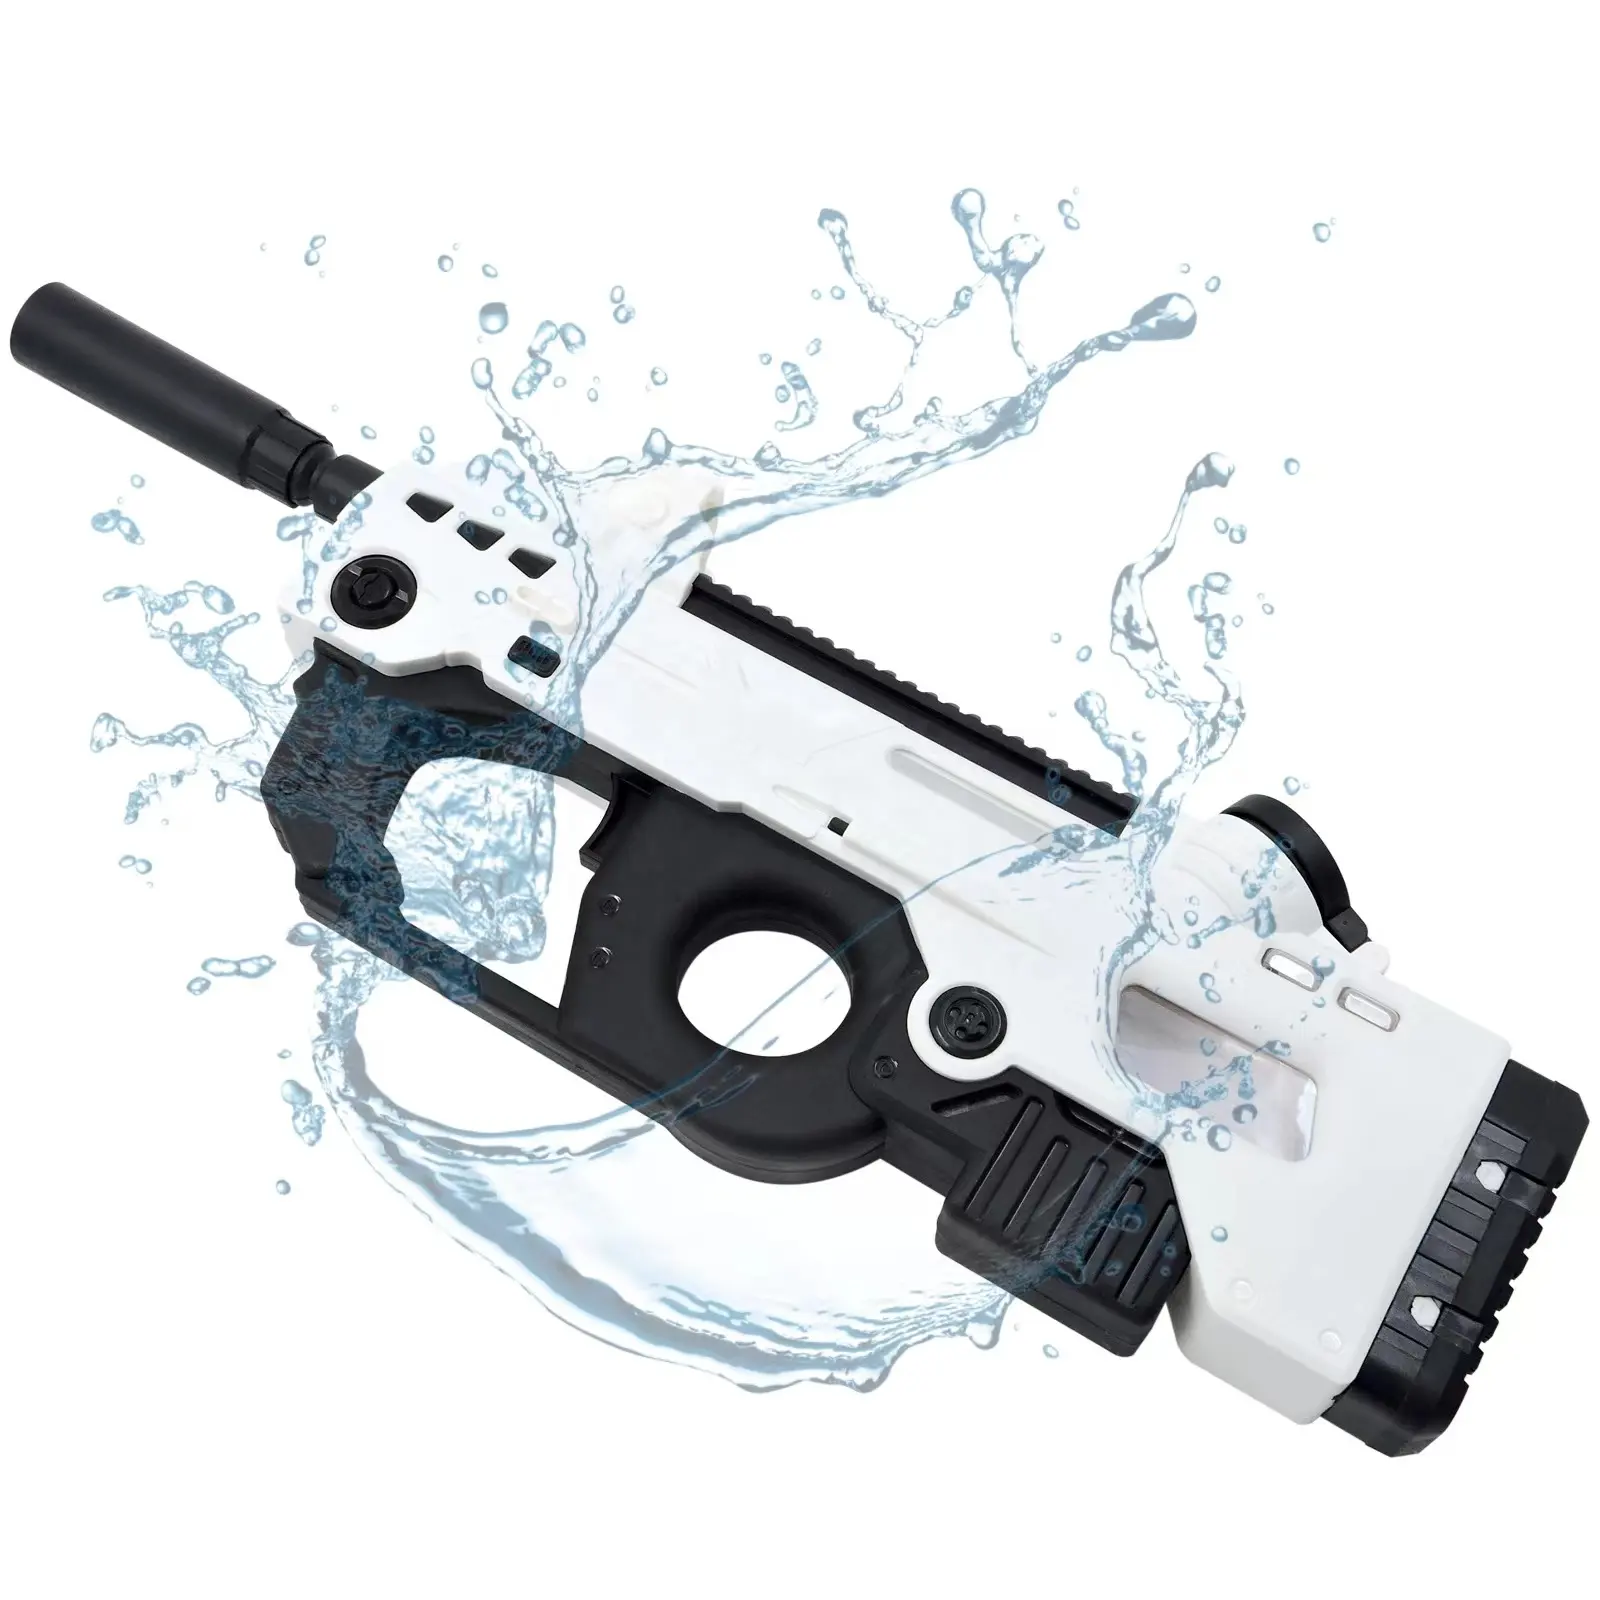 Discount P90 Electric Water Gun for Adults 26 ft Range Automatic Water Pistol with 1200mAh Battery Powerful Long Distance